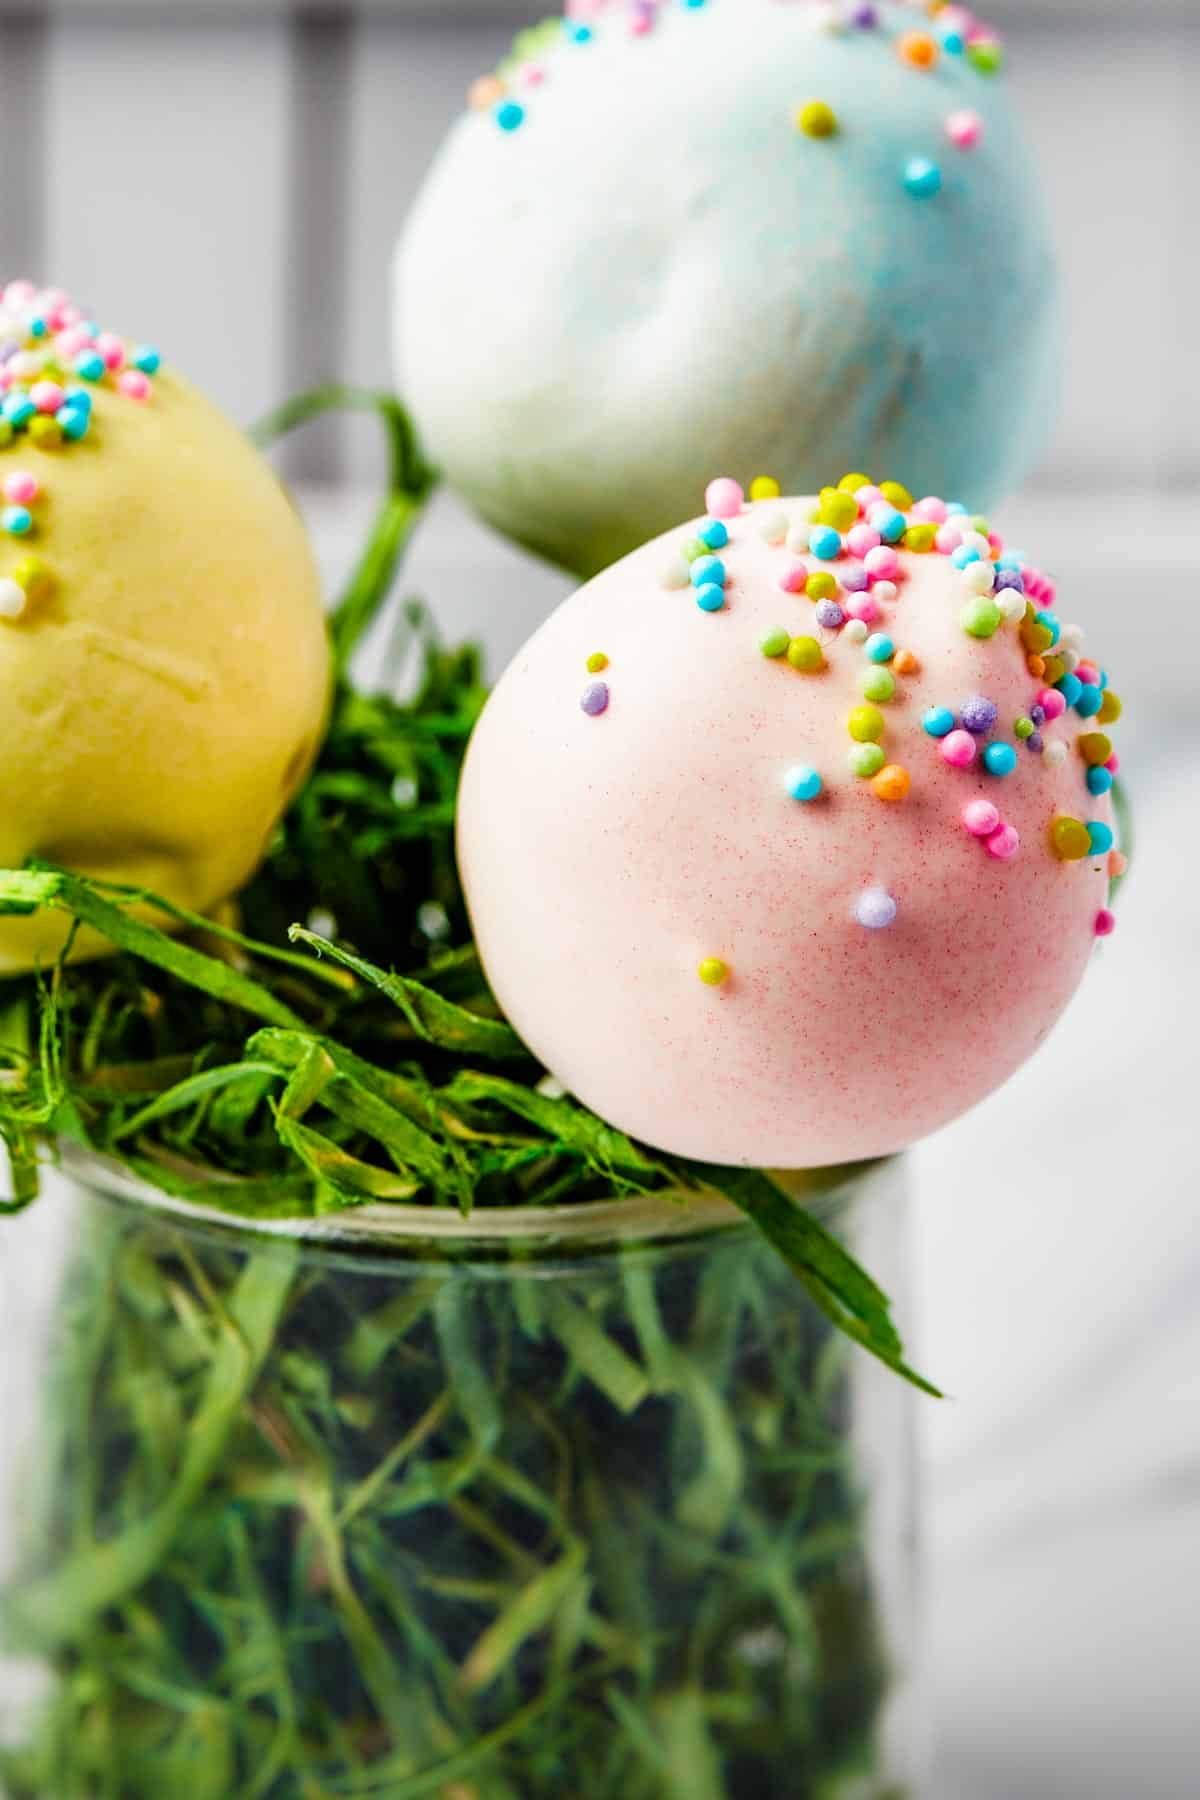 Pastel lollipops in a white basket filled with Easter grass.